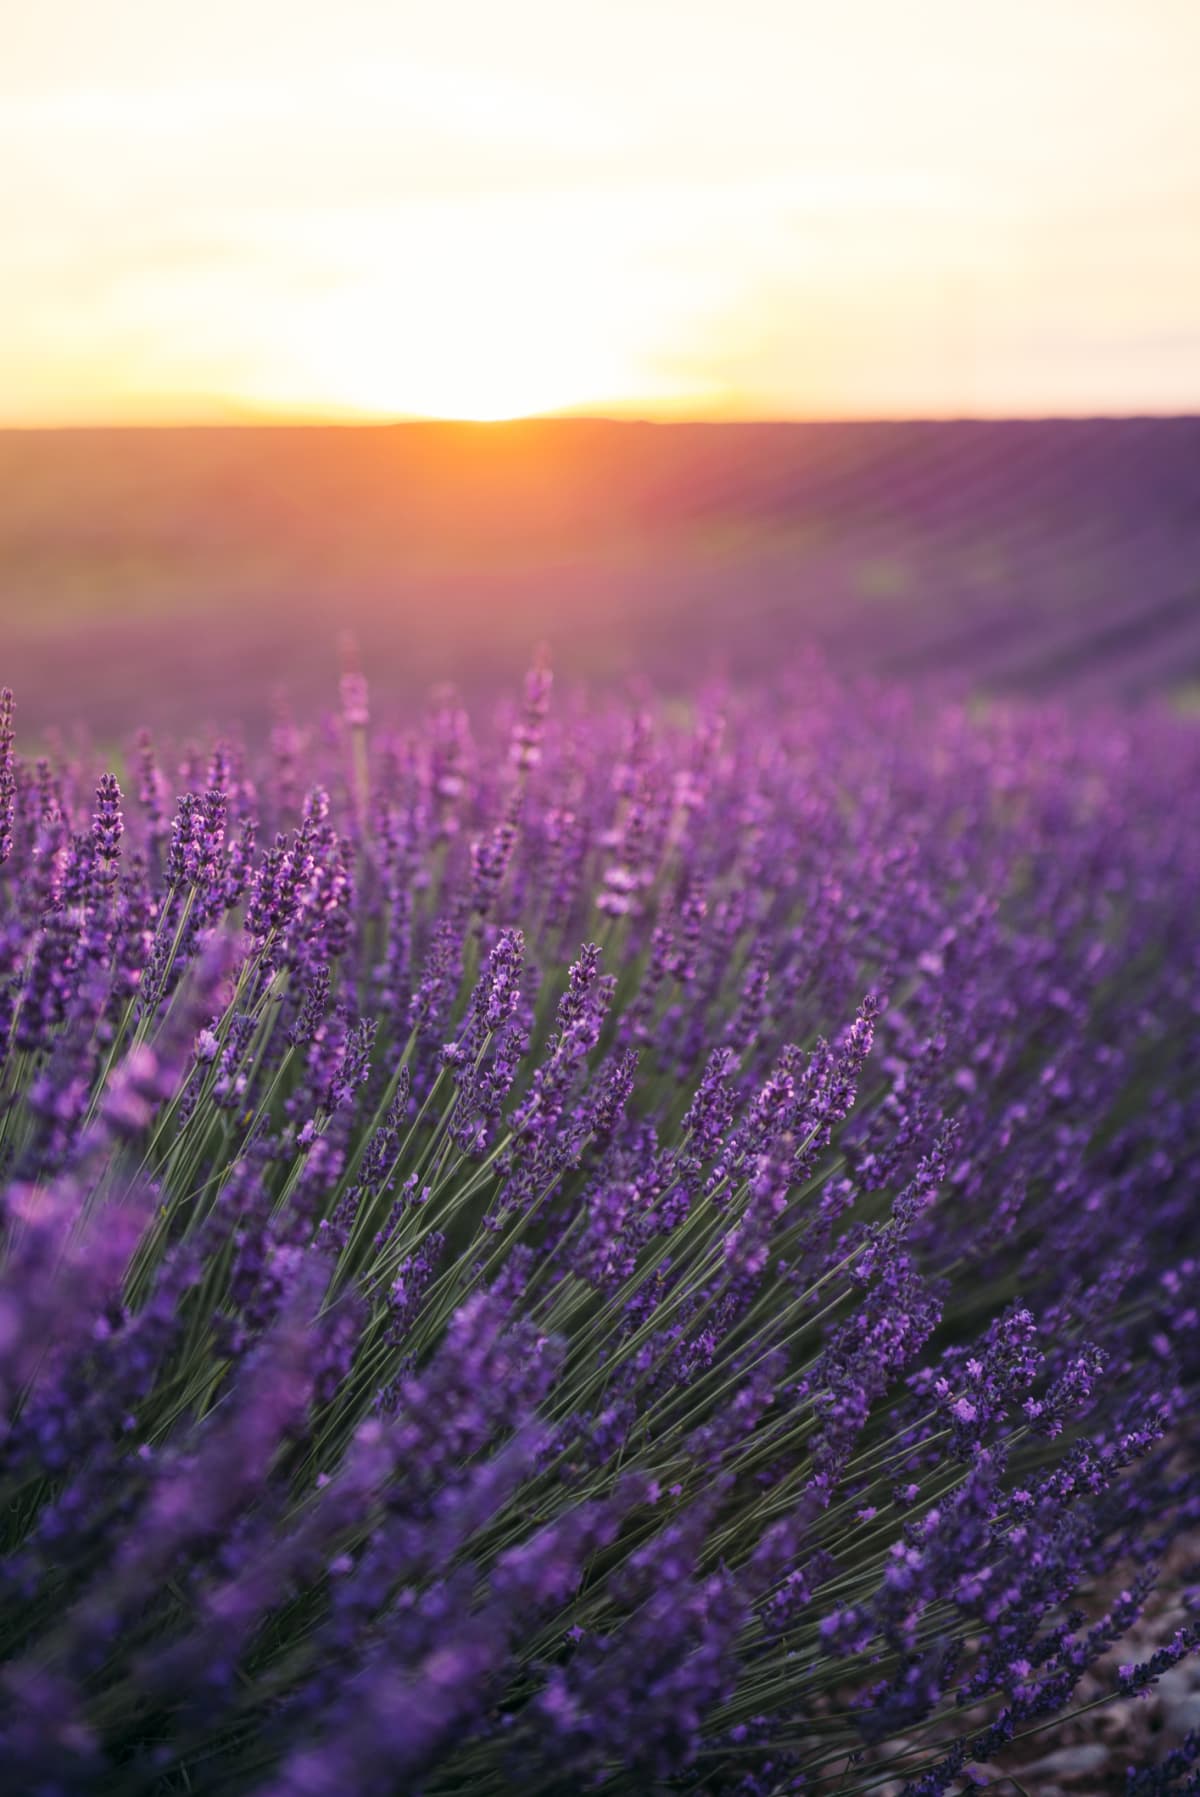 Field of lavender with sunset in background.